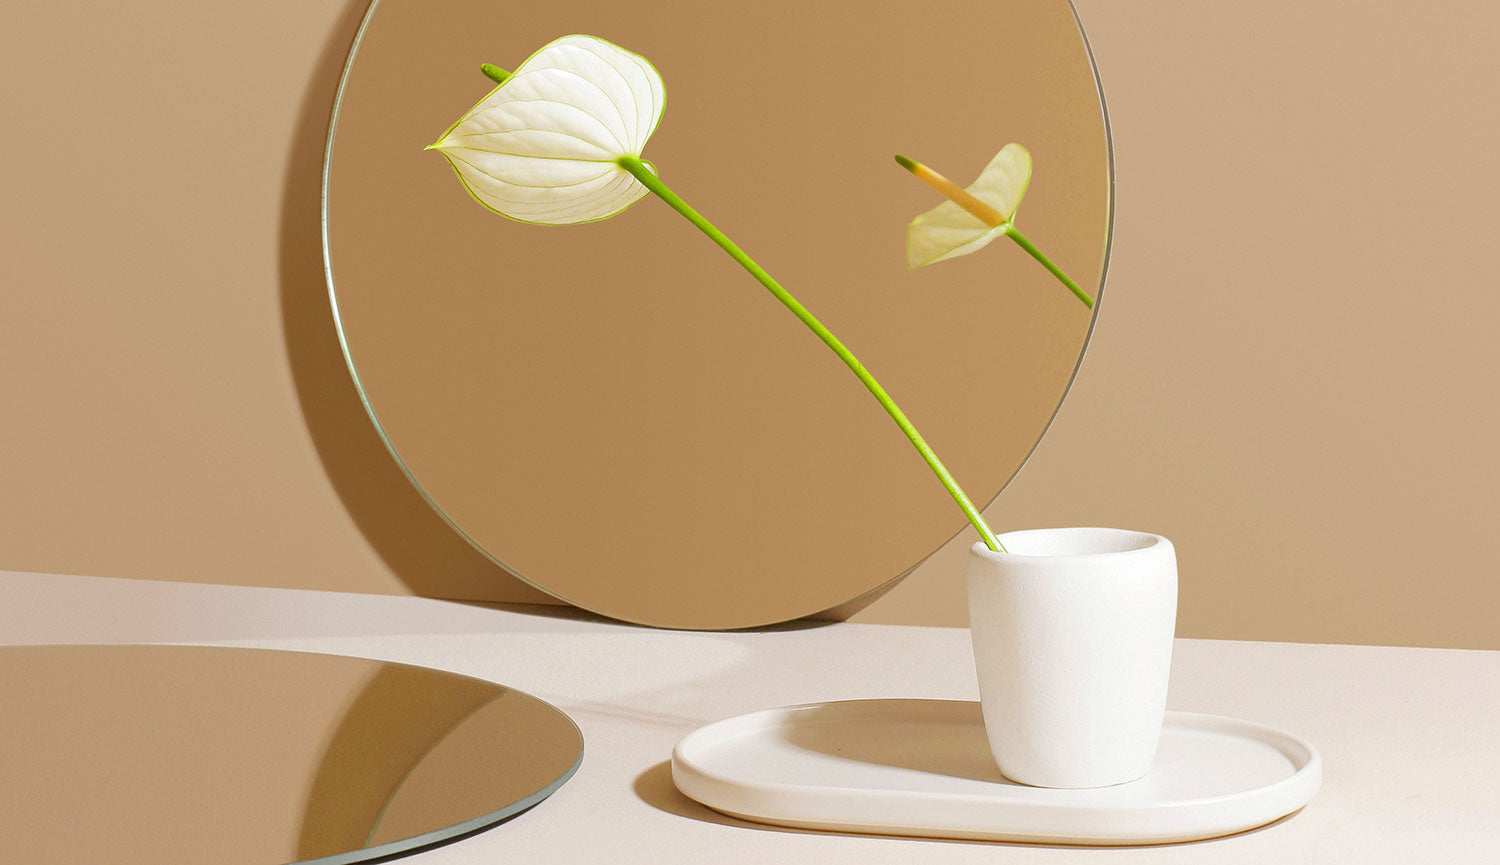 A white Anthurium flower sits in a white cup on a white tray and is reflected in a round mirror in front of a tan wall. Image by Marina Podrez.